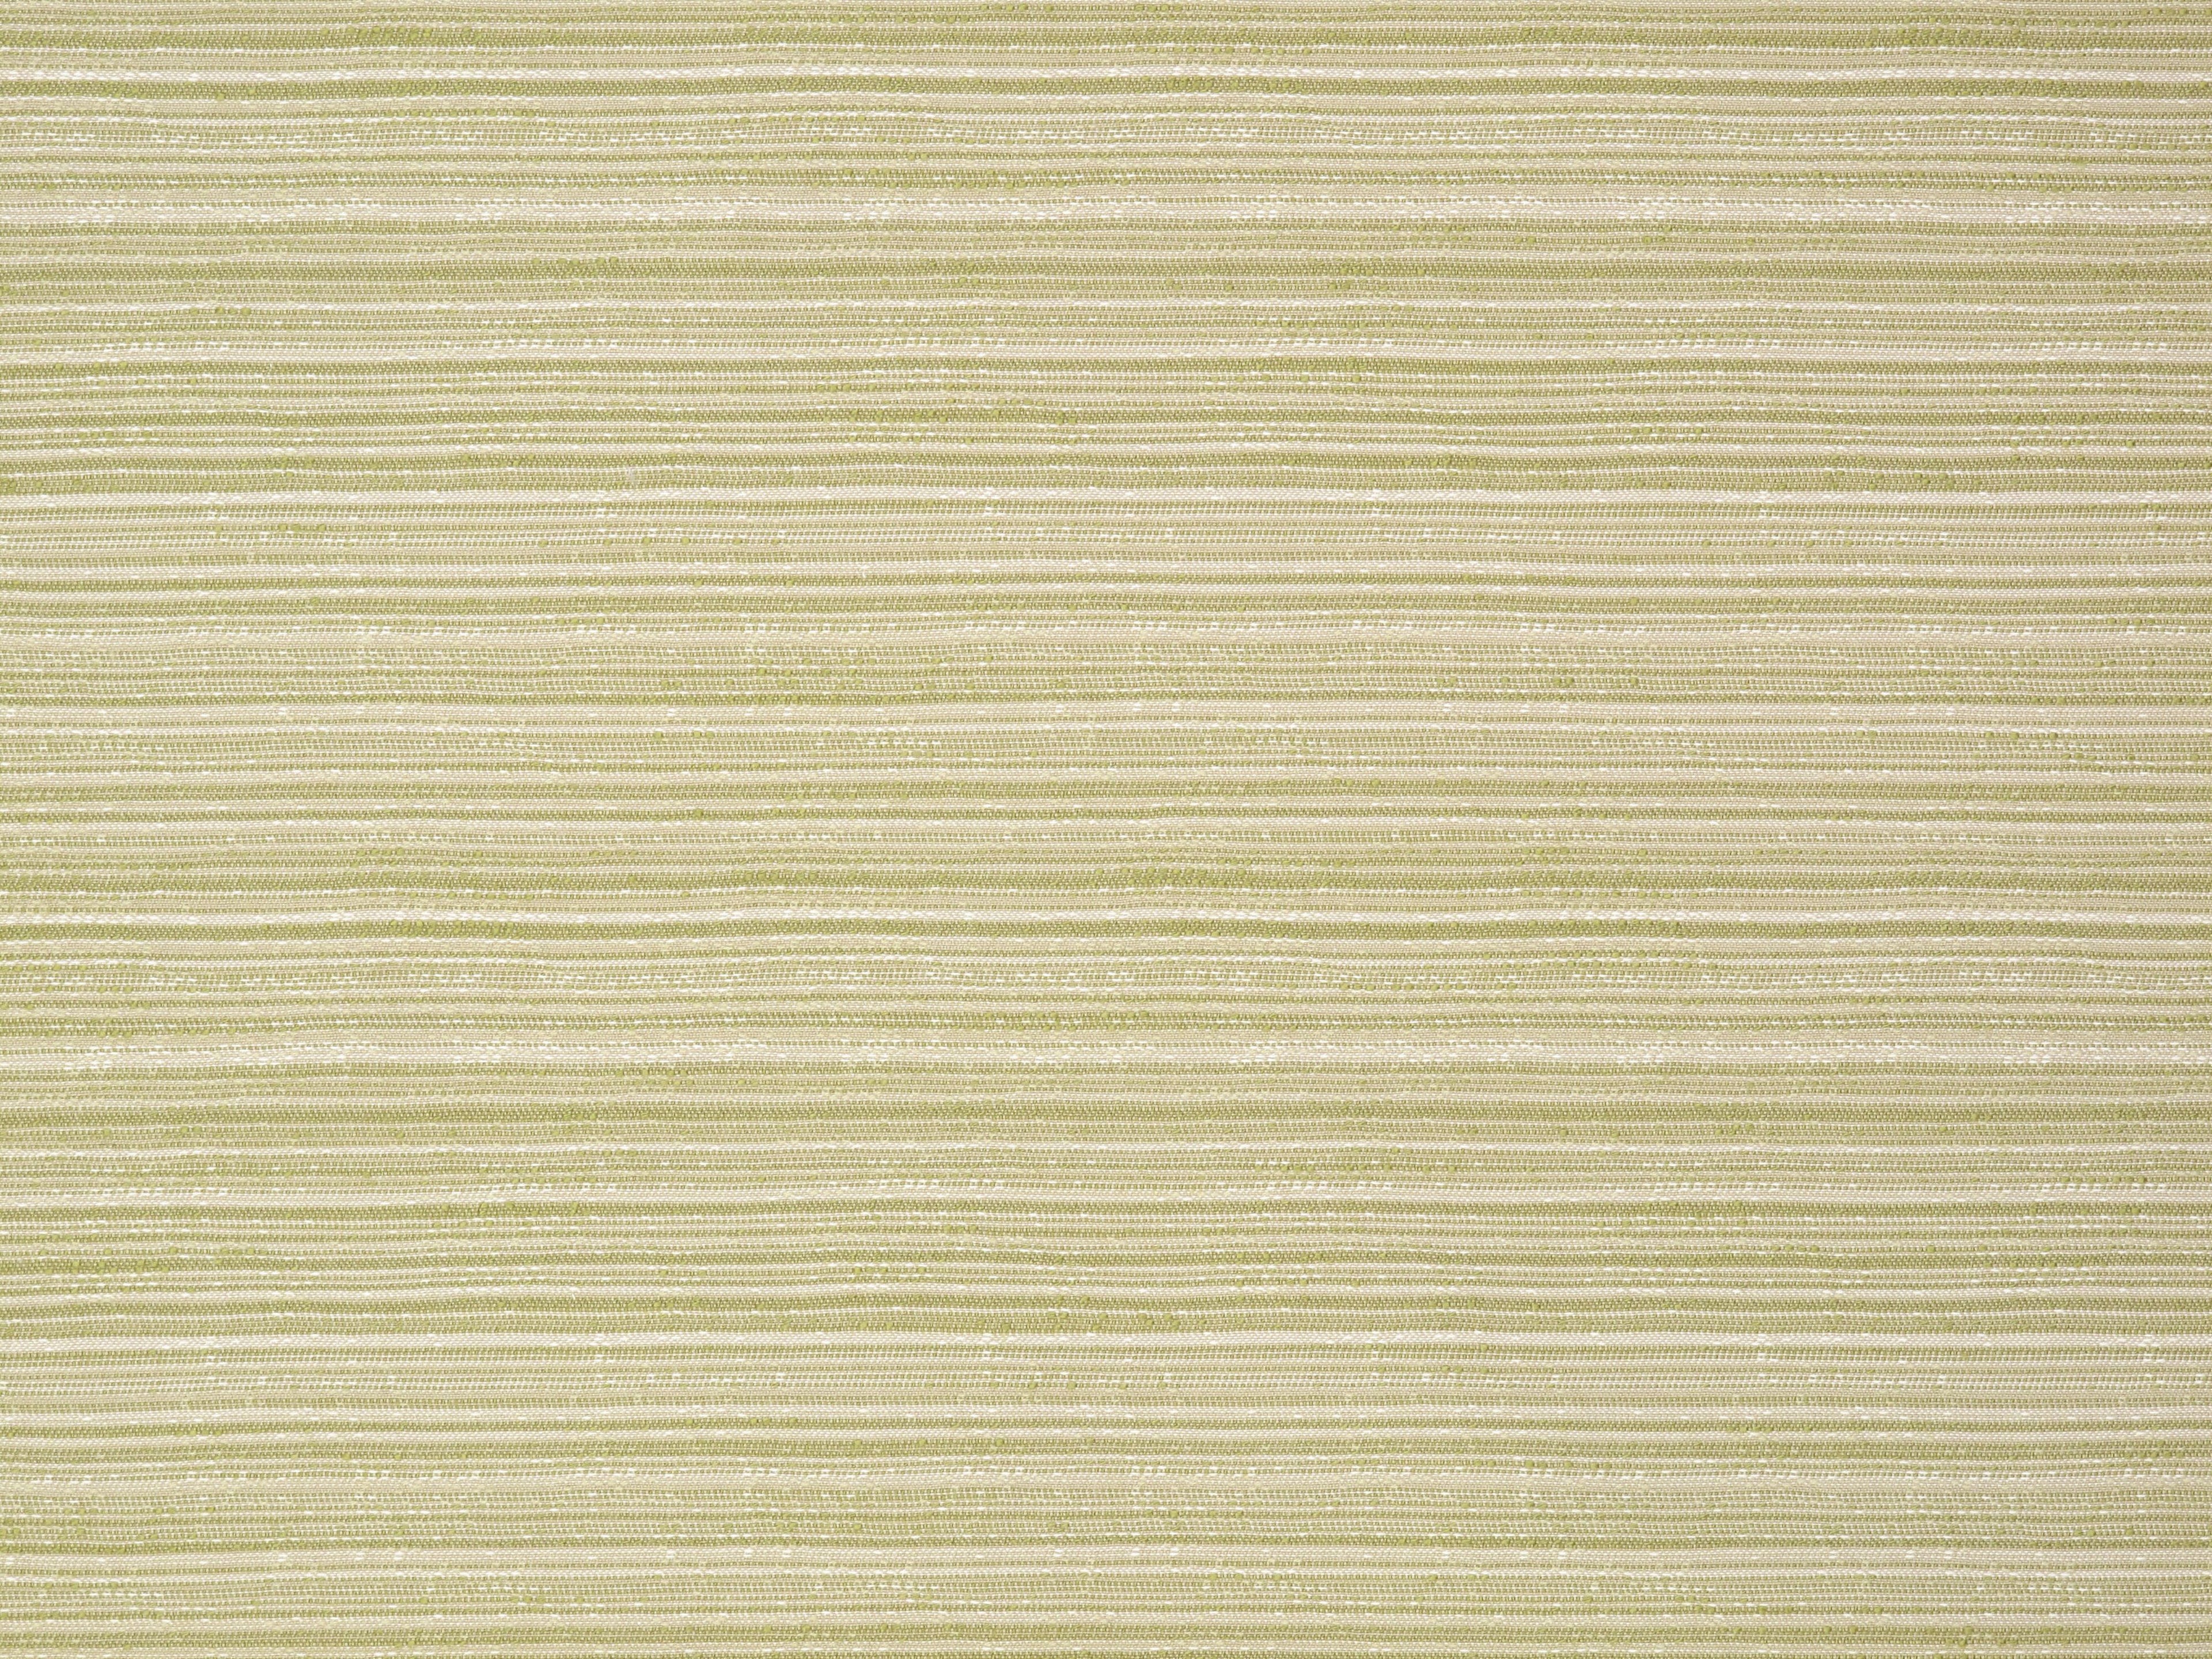 Avalonia fabric in grass color - pattern number WC 0001U193 - by Scalamandre in the Old World Weavers collection